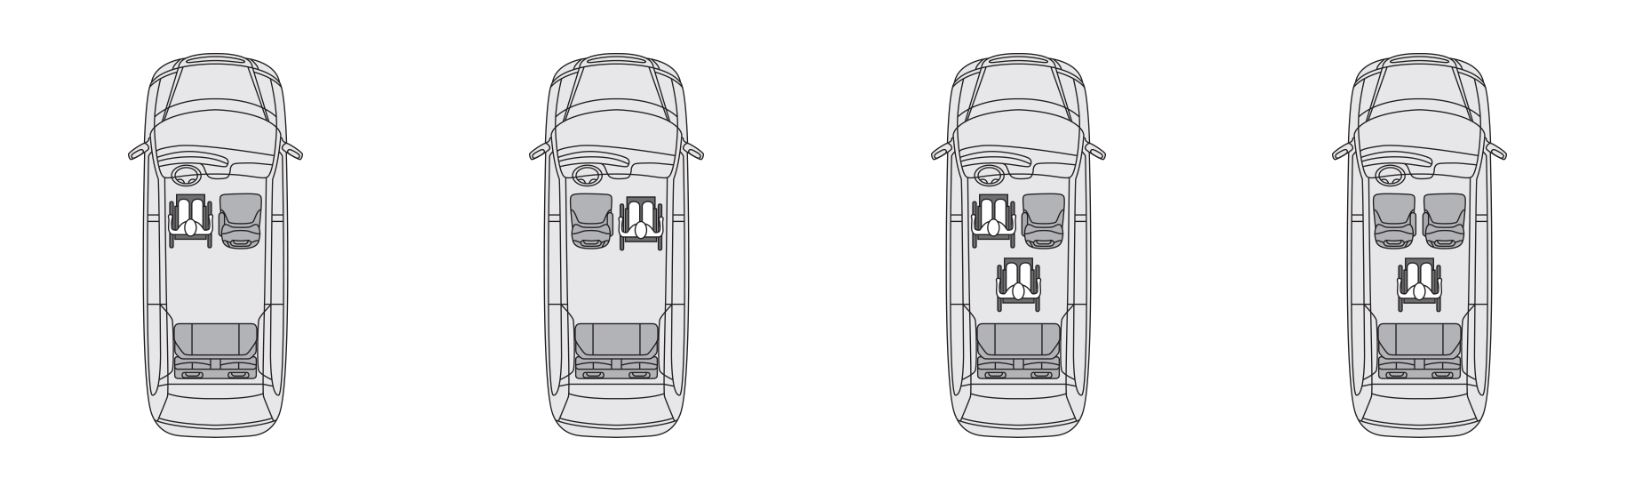 diagram showing 4 options for the Chrysler mobility van